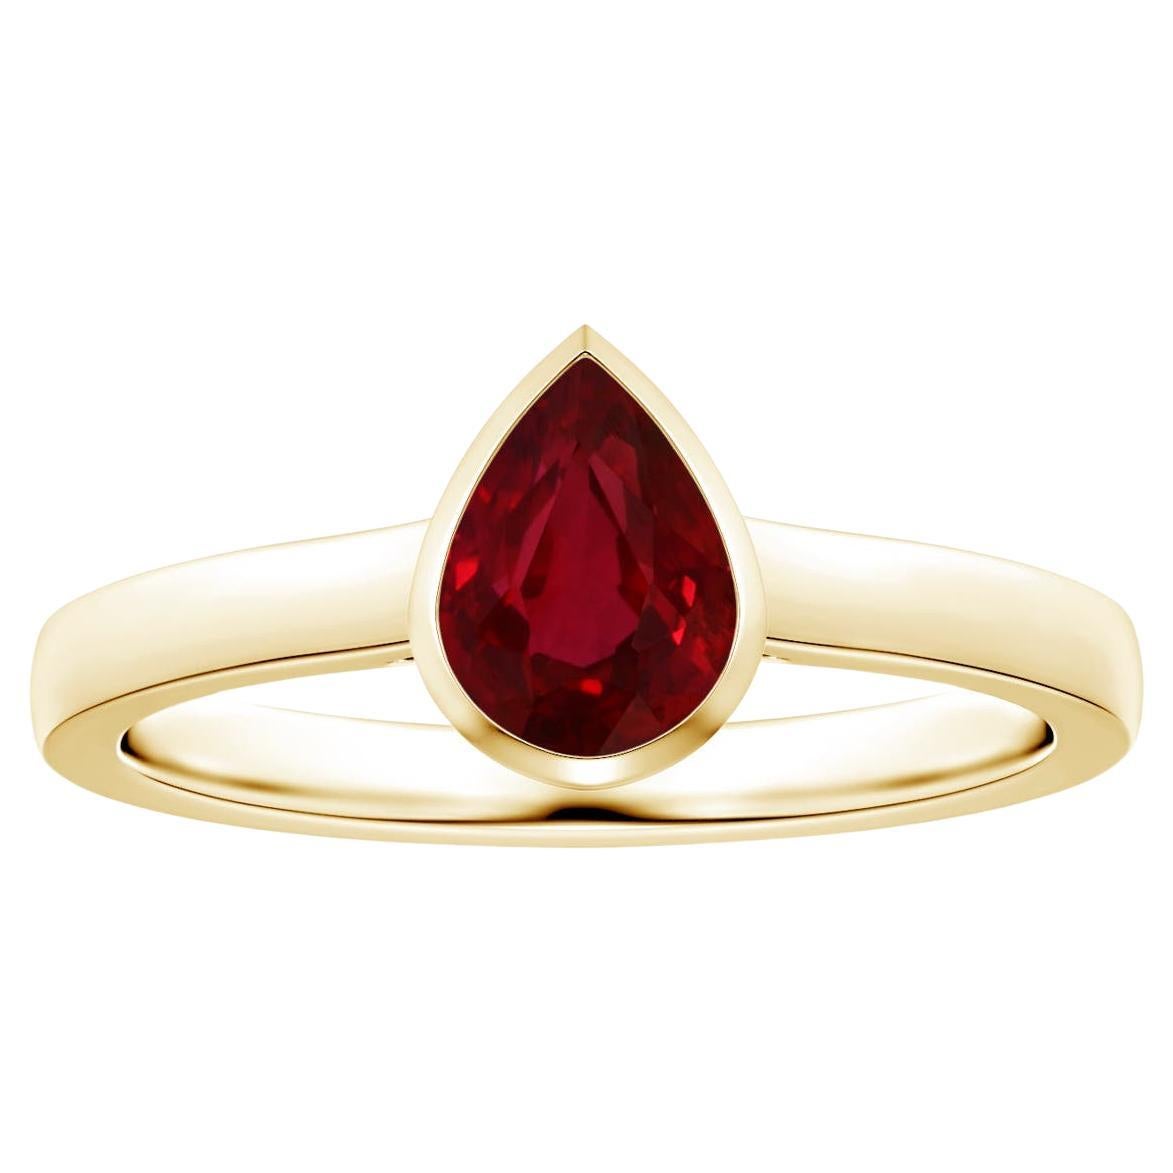 ANGARA Bezel-Set GIA Certified Pear-Shaped Ruby Solitaire Ring in Yellow Gold